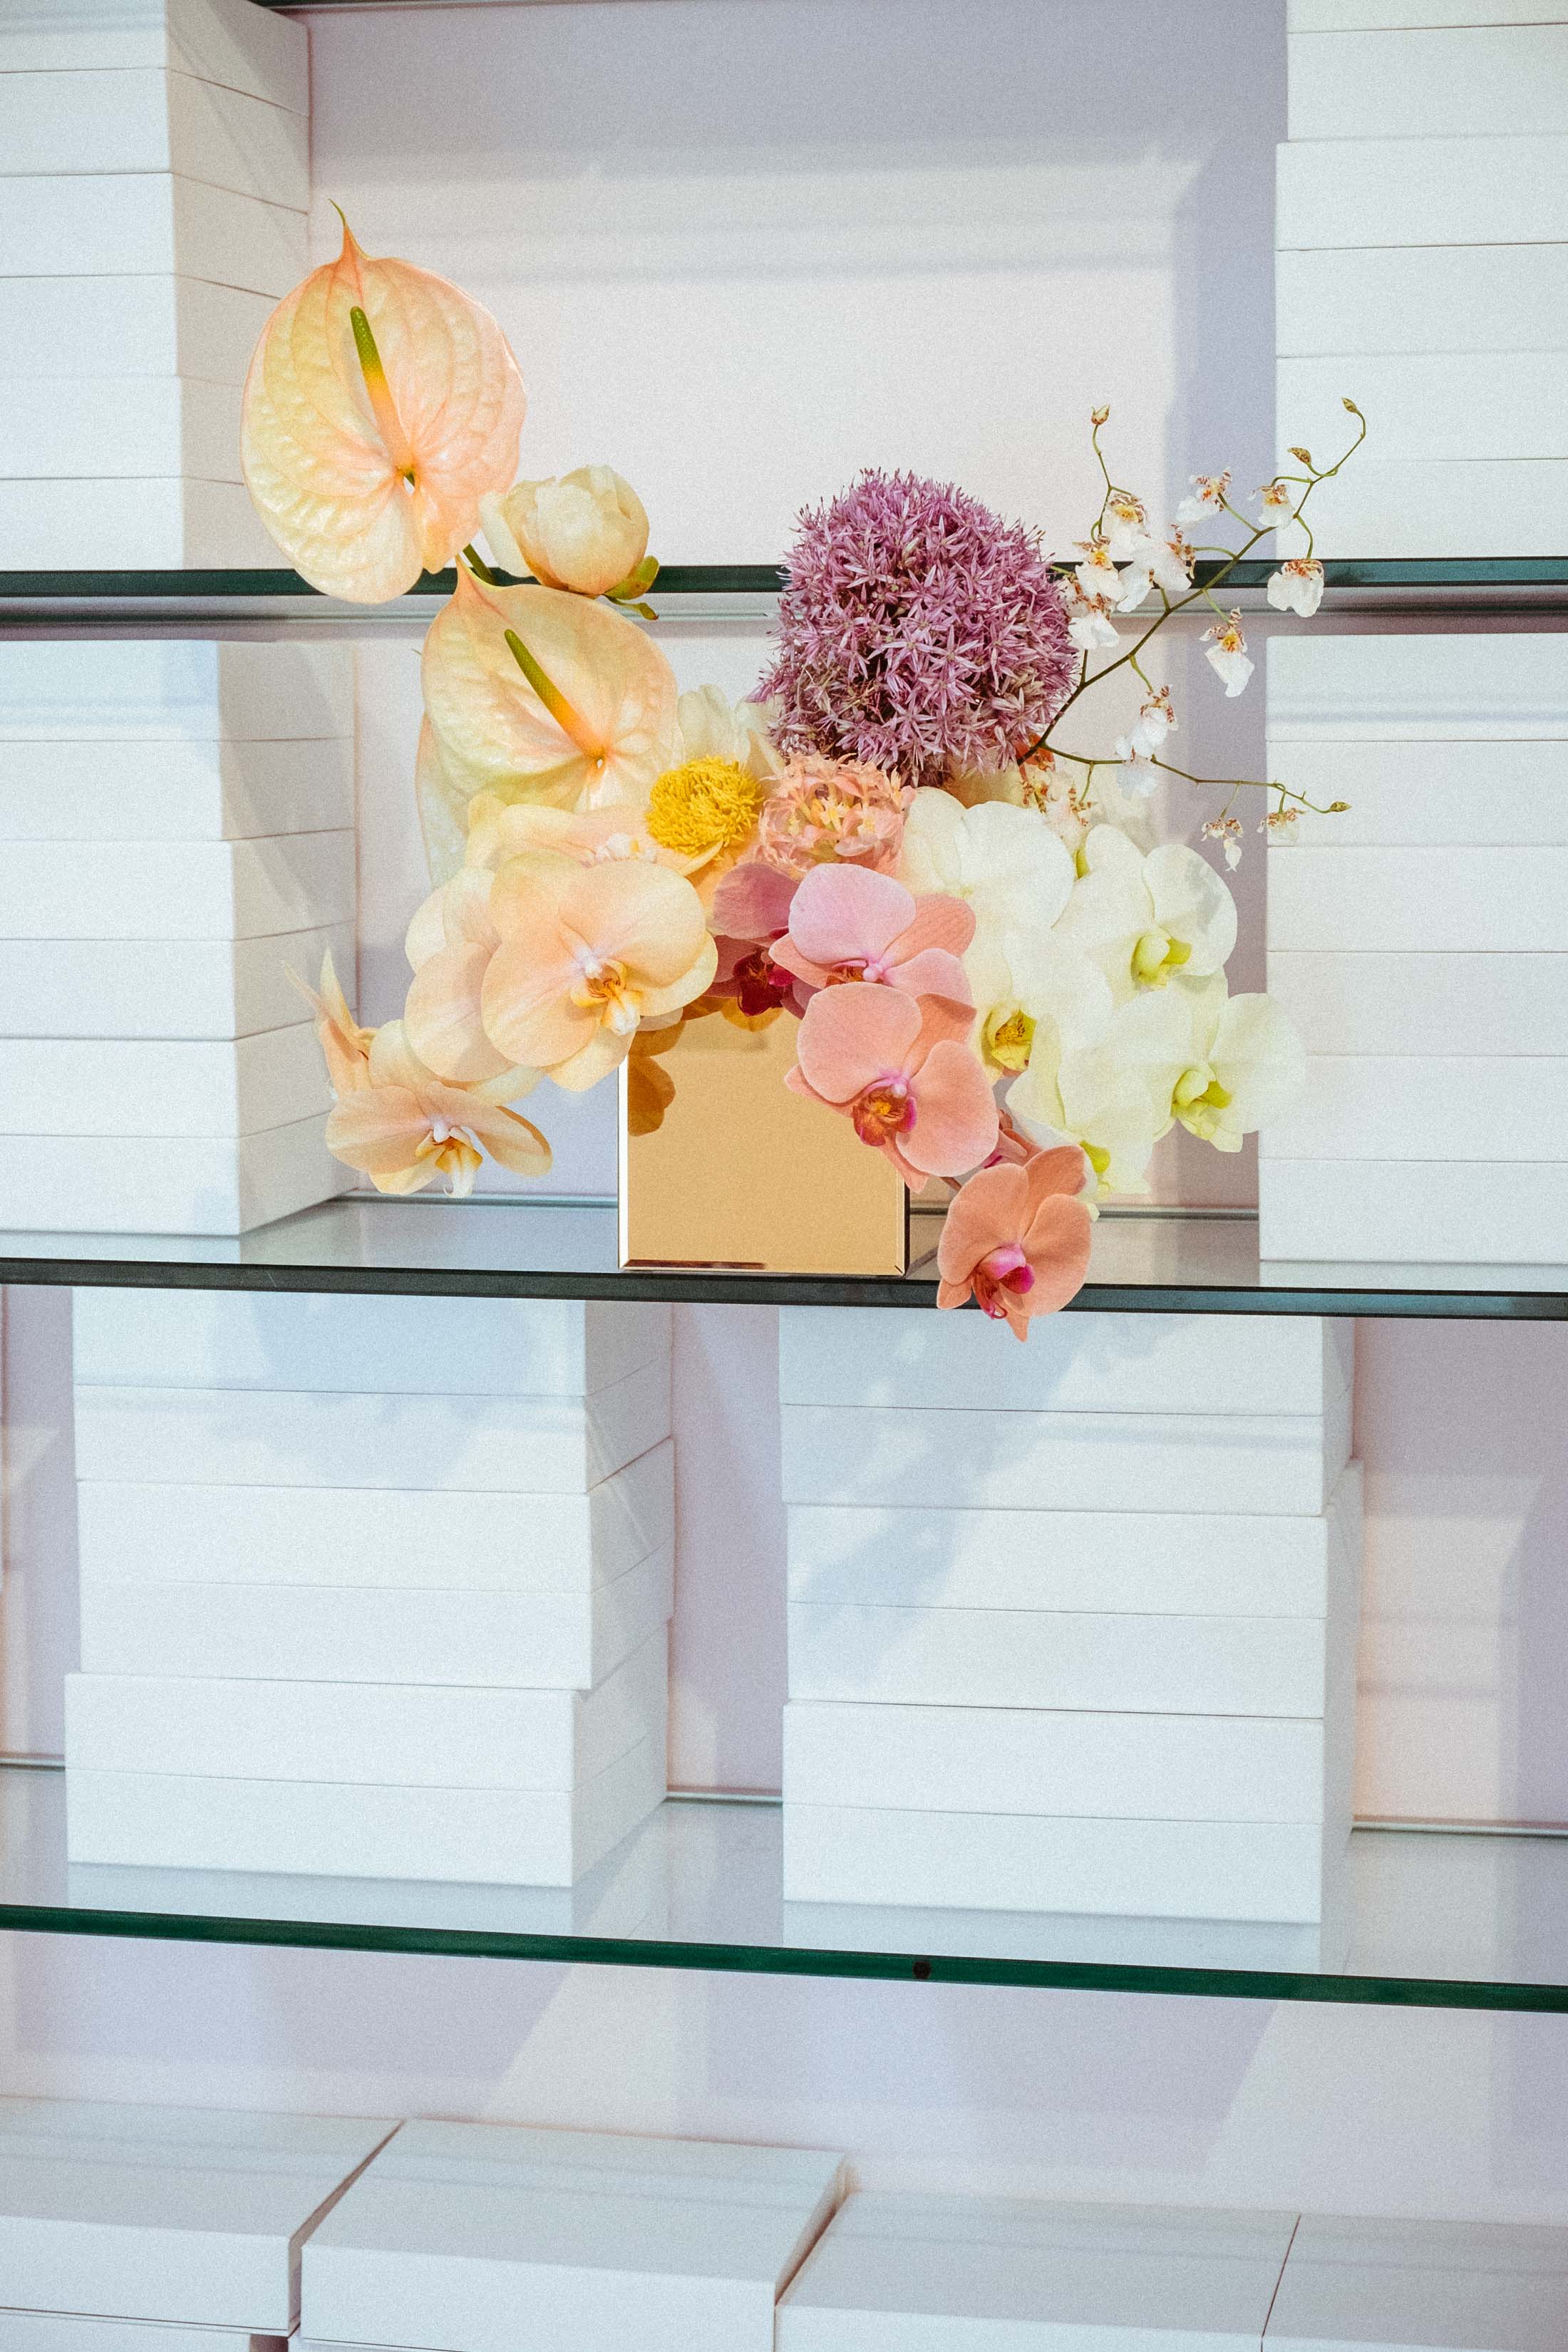 Flowers by Brittany Asch of Brrch Floral in the Glossier Showroom